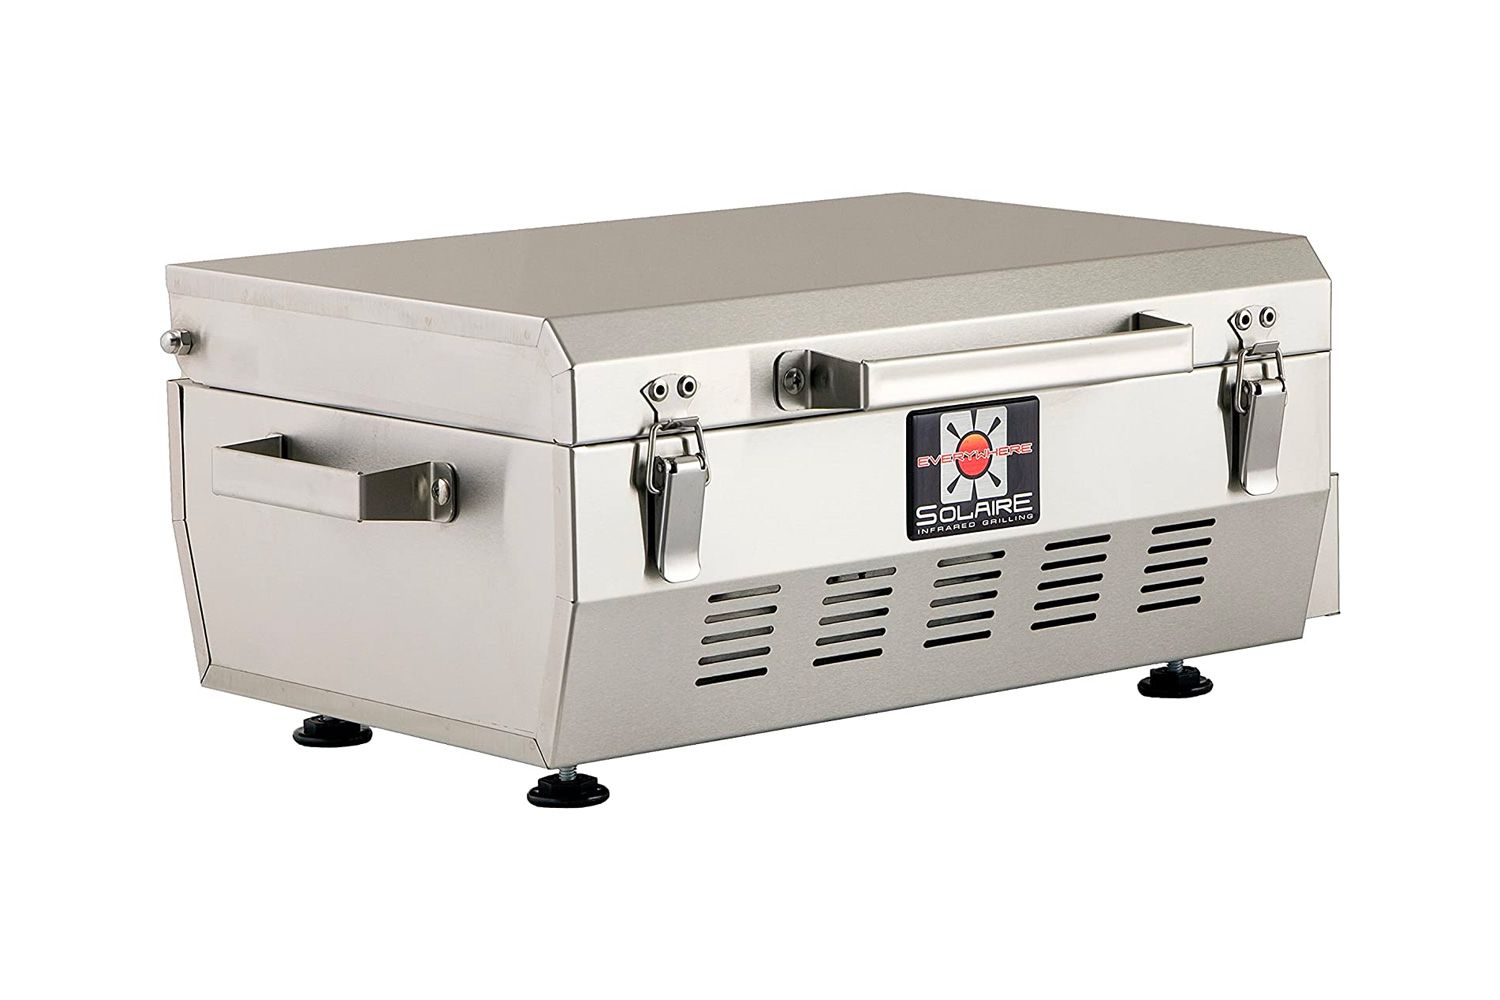 Solaire SOL-EV17A Everywhere Portable Infrared Propane Gas Grill